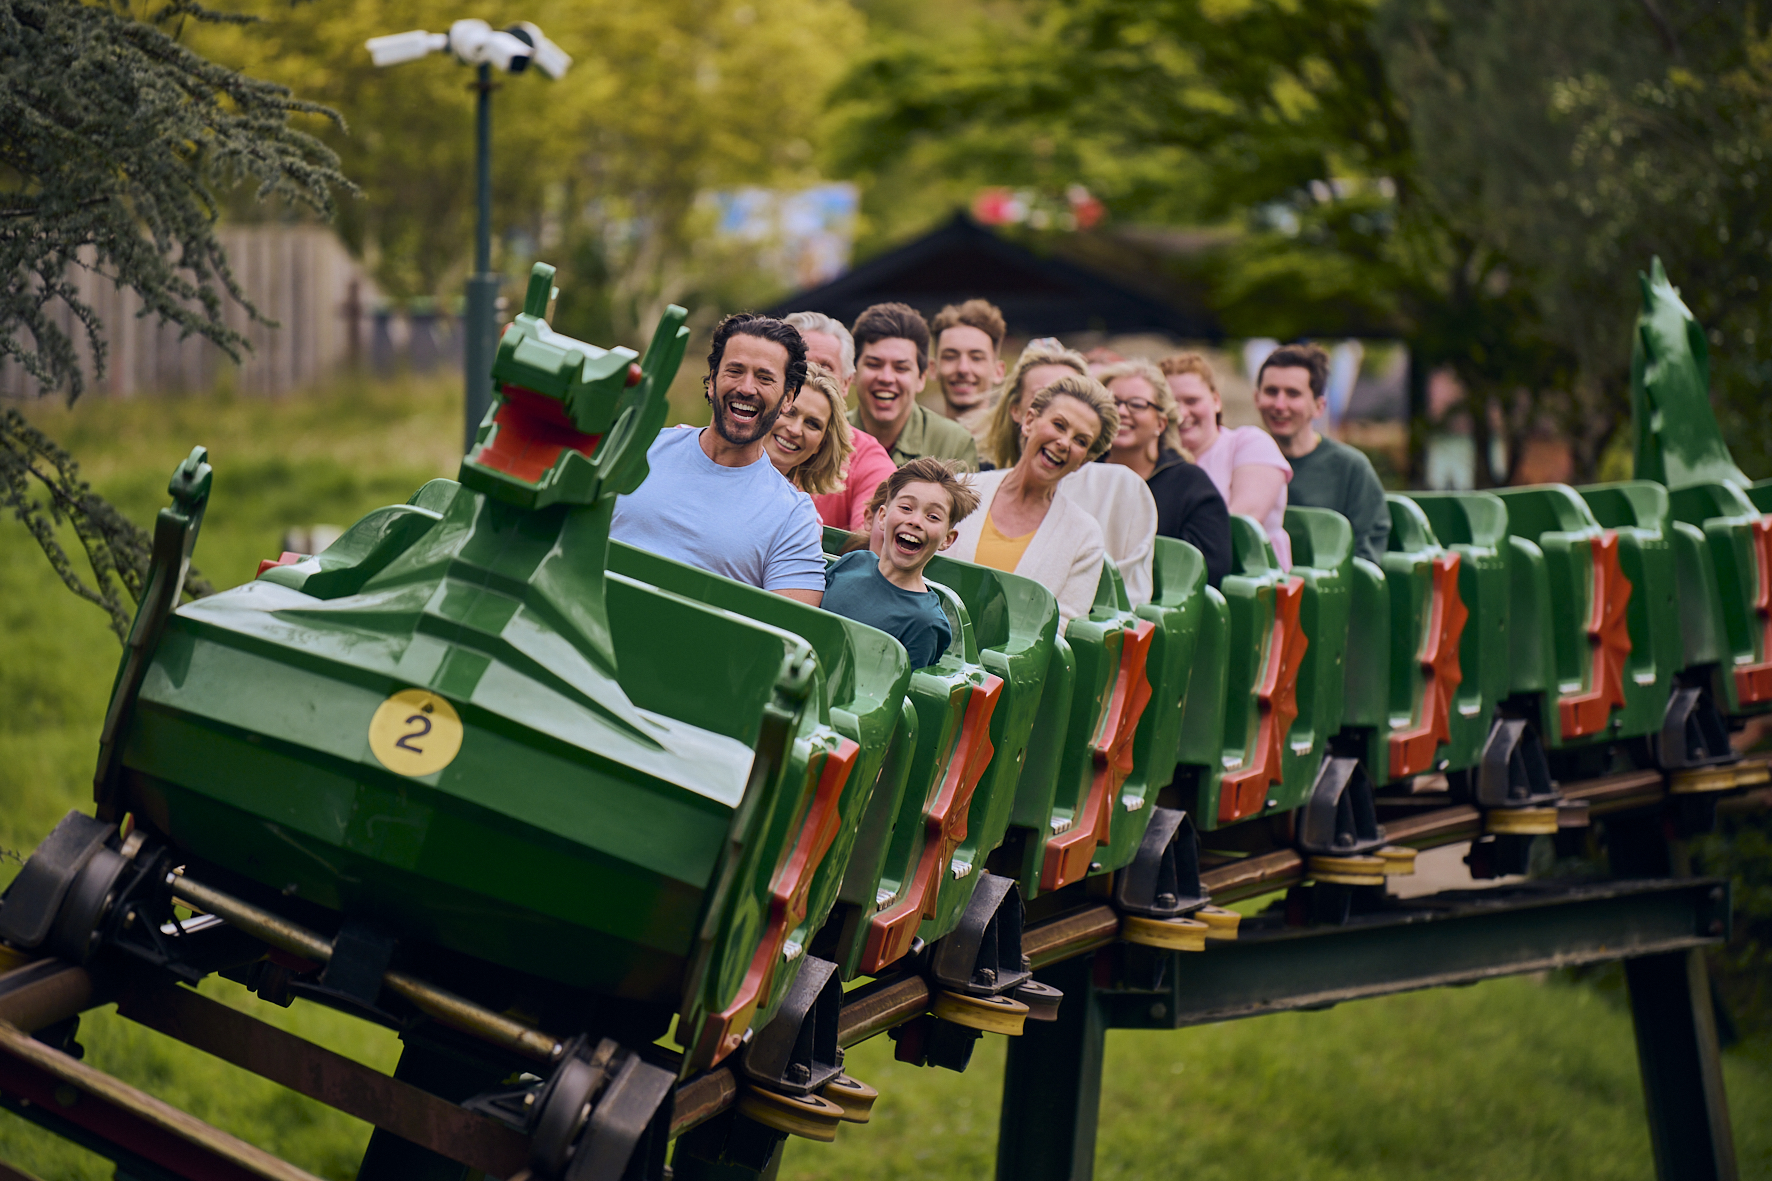 Families on the Dragon coaster at the LEGOLAND Windsor Resort